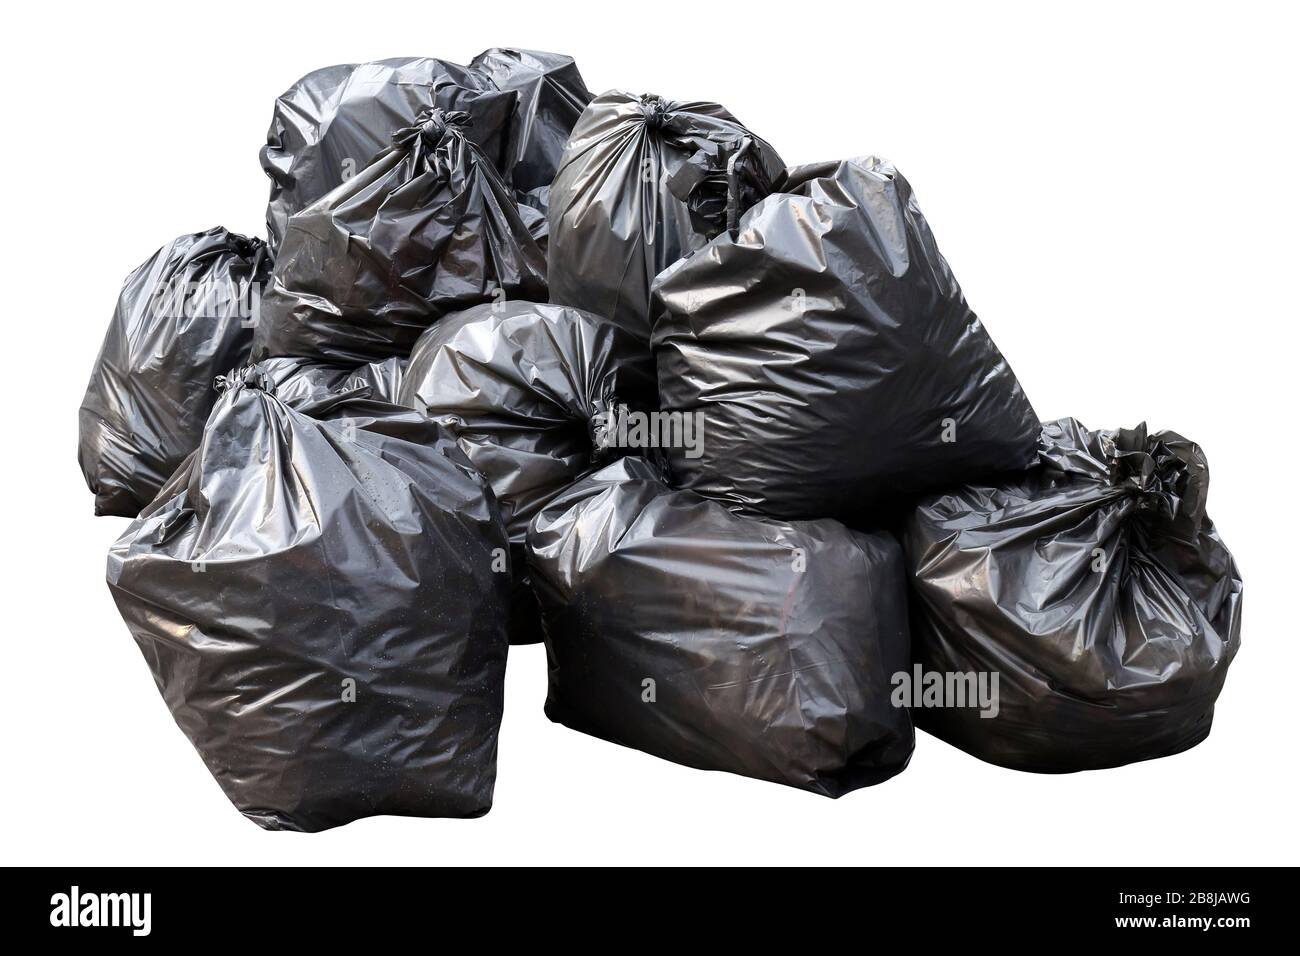 Lots of bin bags Cut Out Stock Images & Pictures - Alamy